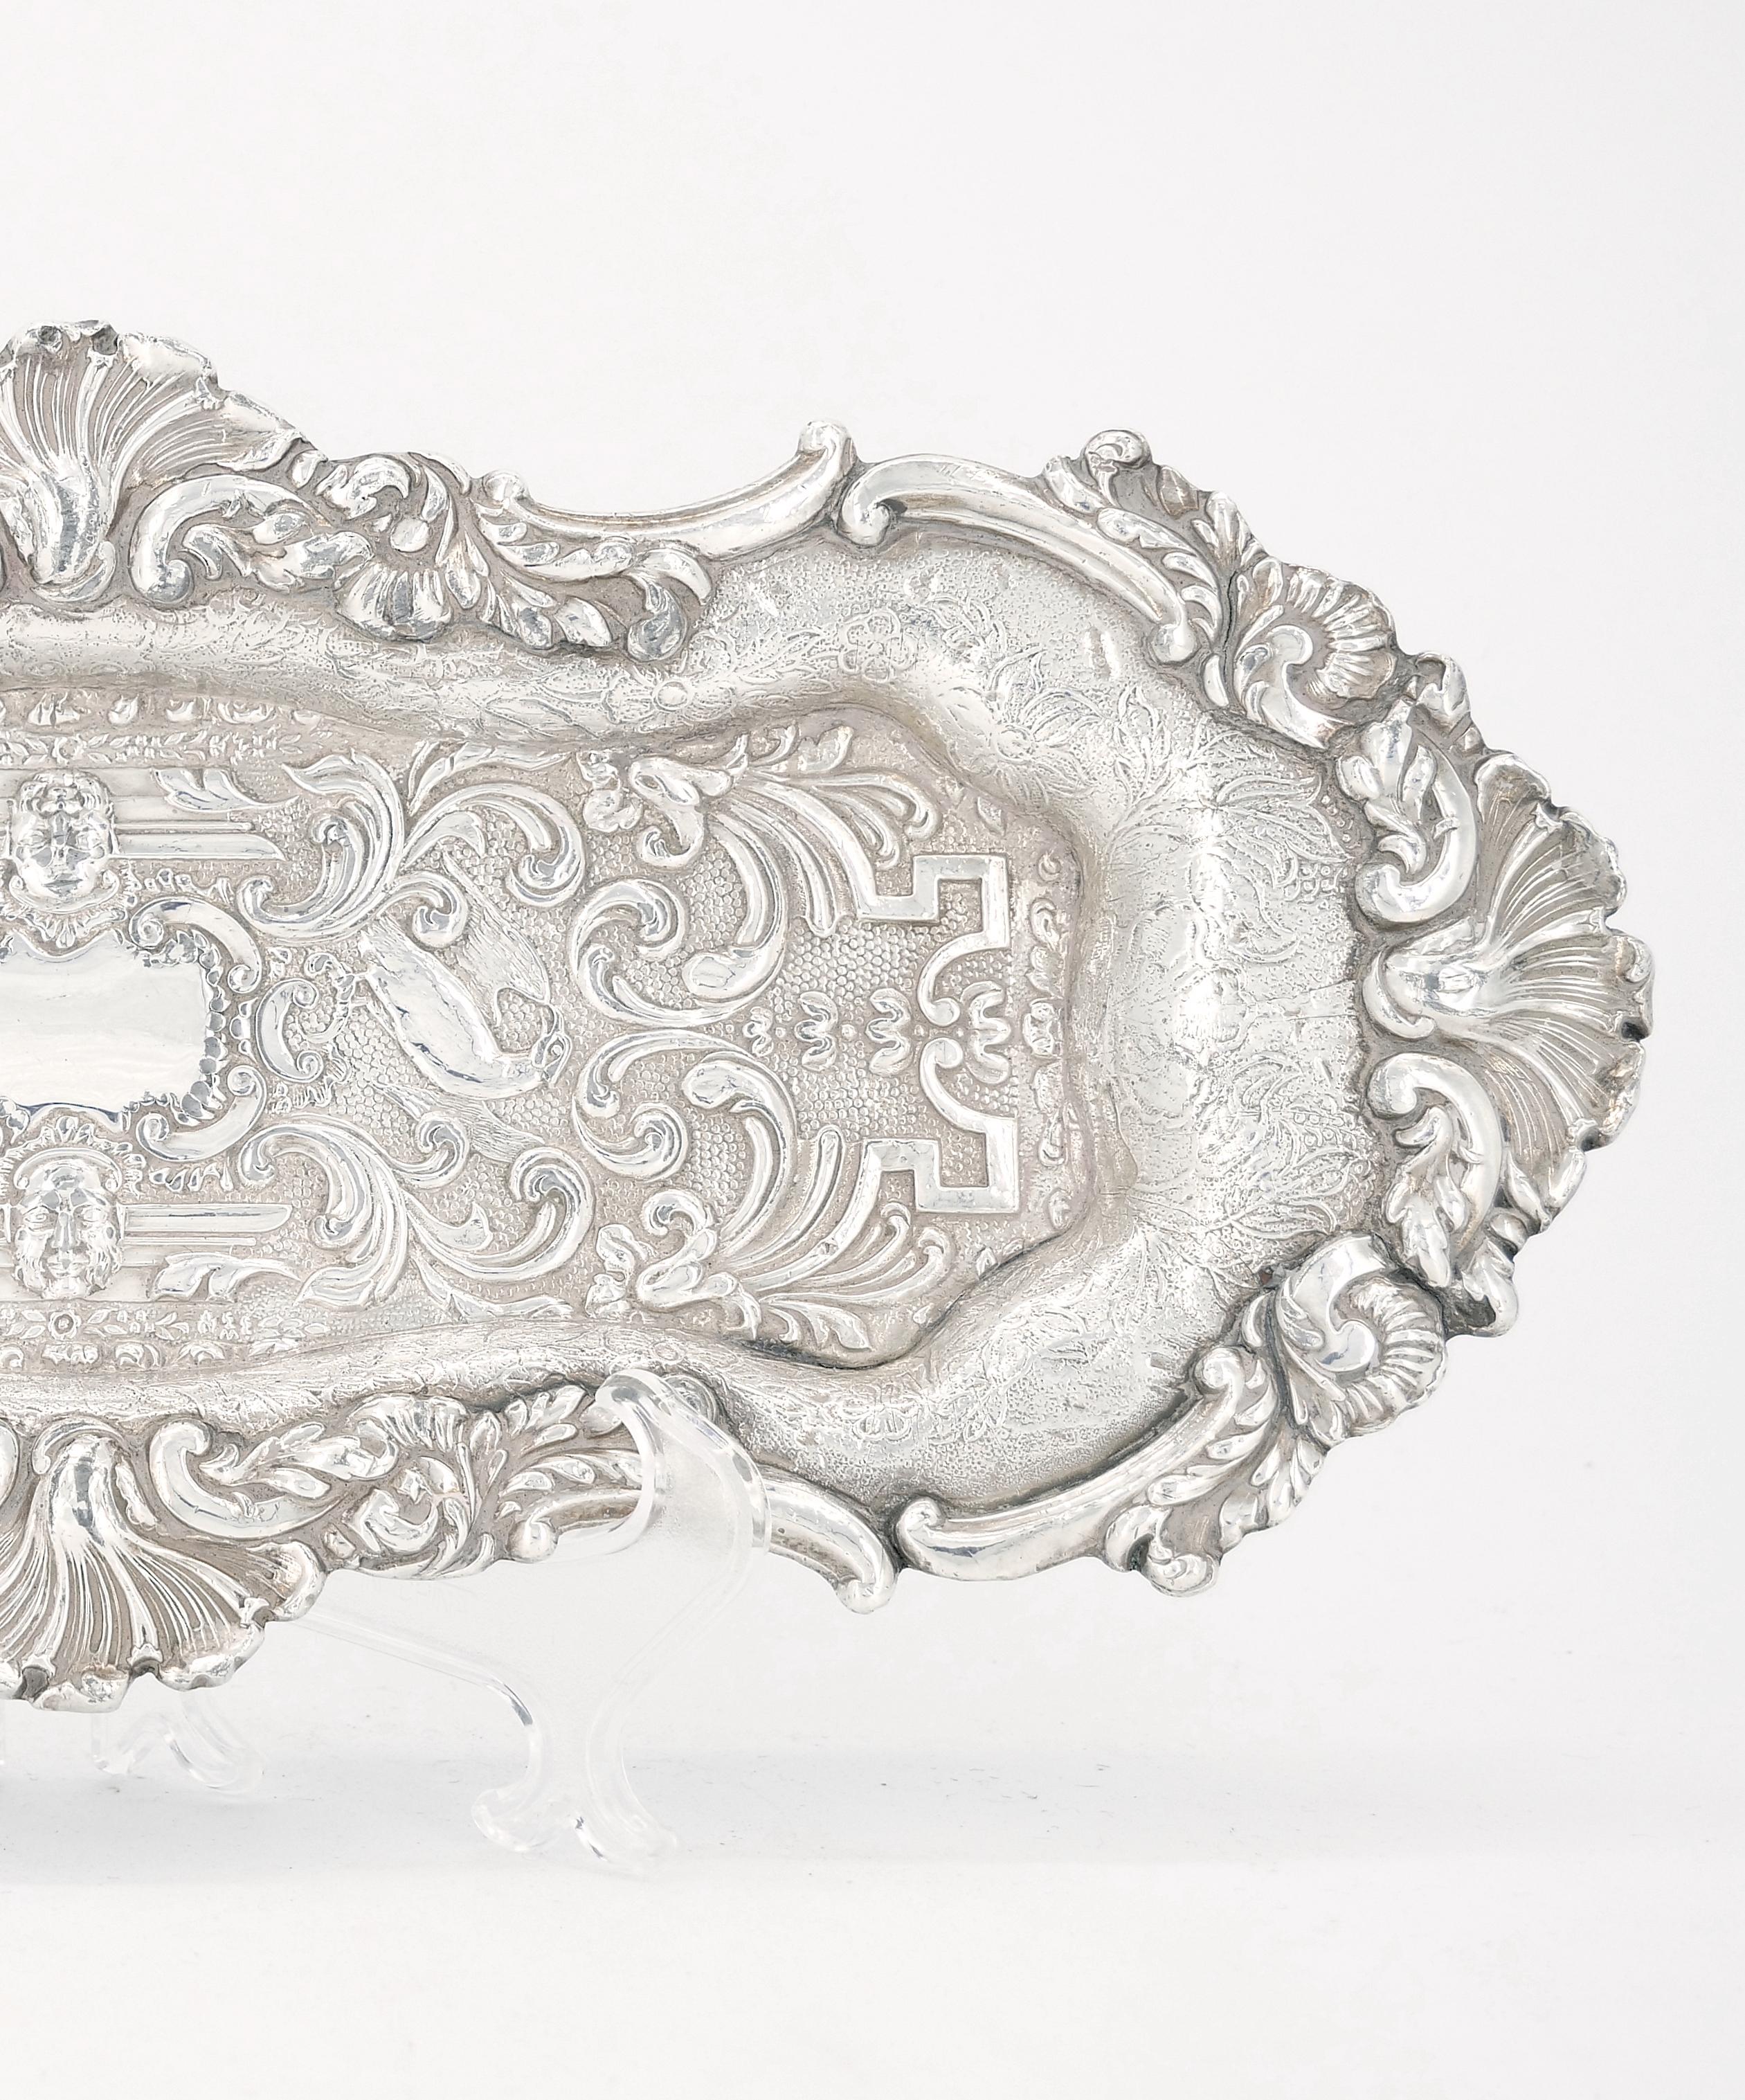 Old English Sheffield Silver Plate Snuffer Tray / Engraved Interior For Sale 6